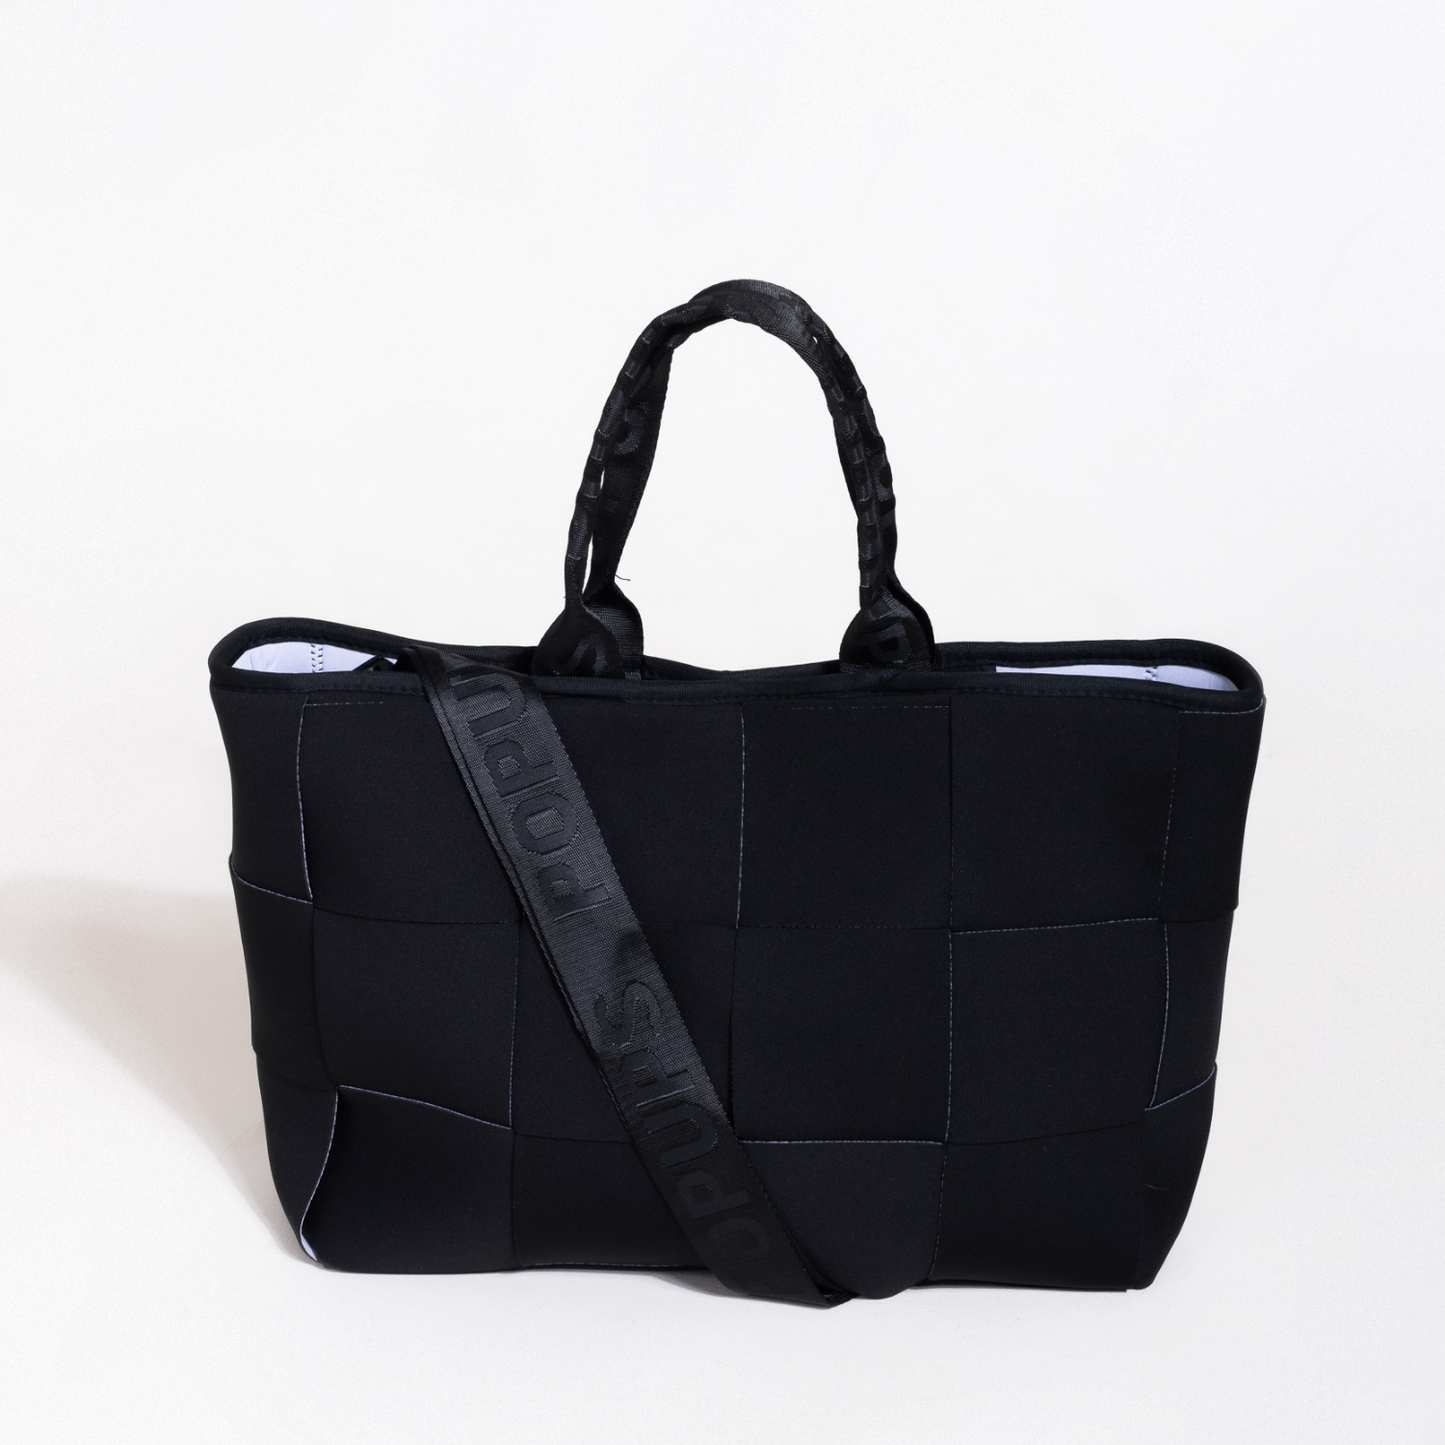 ICON TOTE + FLAP CROSSBODY + POUCH - BLACK